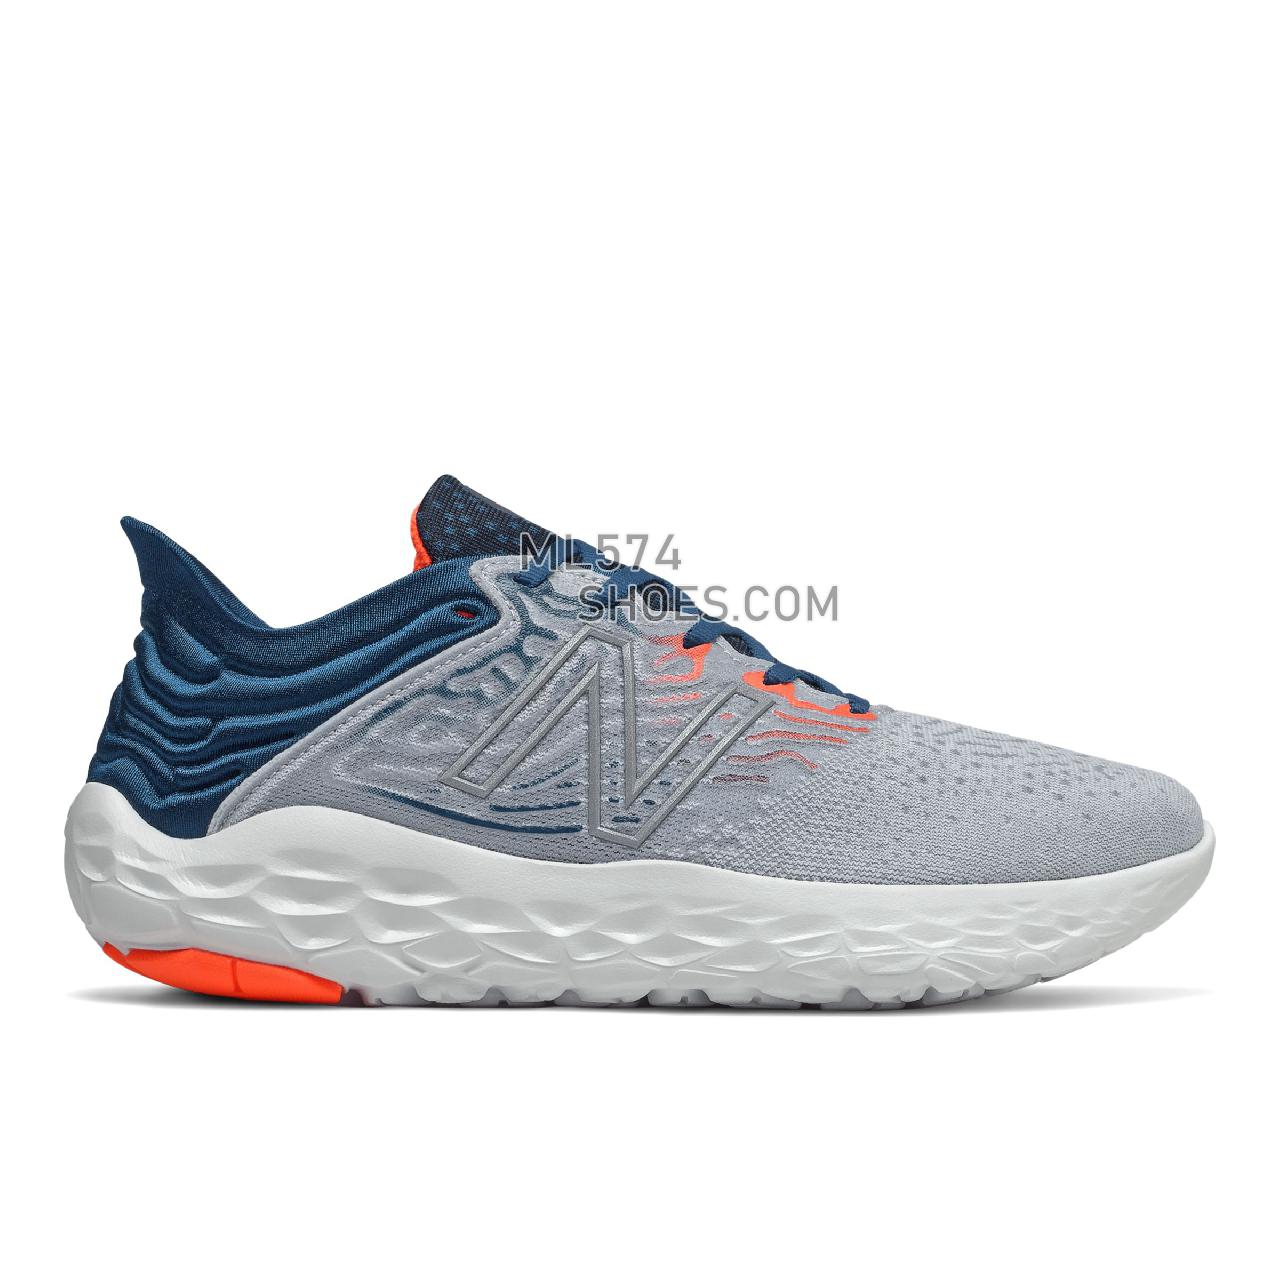 New Balance Fresh Foam Beacon v3 - Men's Neutral Running - Light Cyclone with Rogue Wave and Dynomite - MBECNGB3